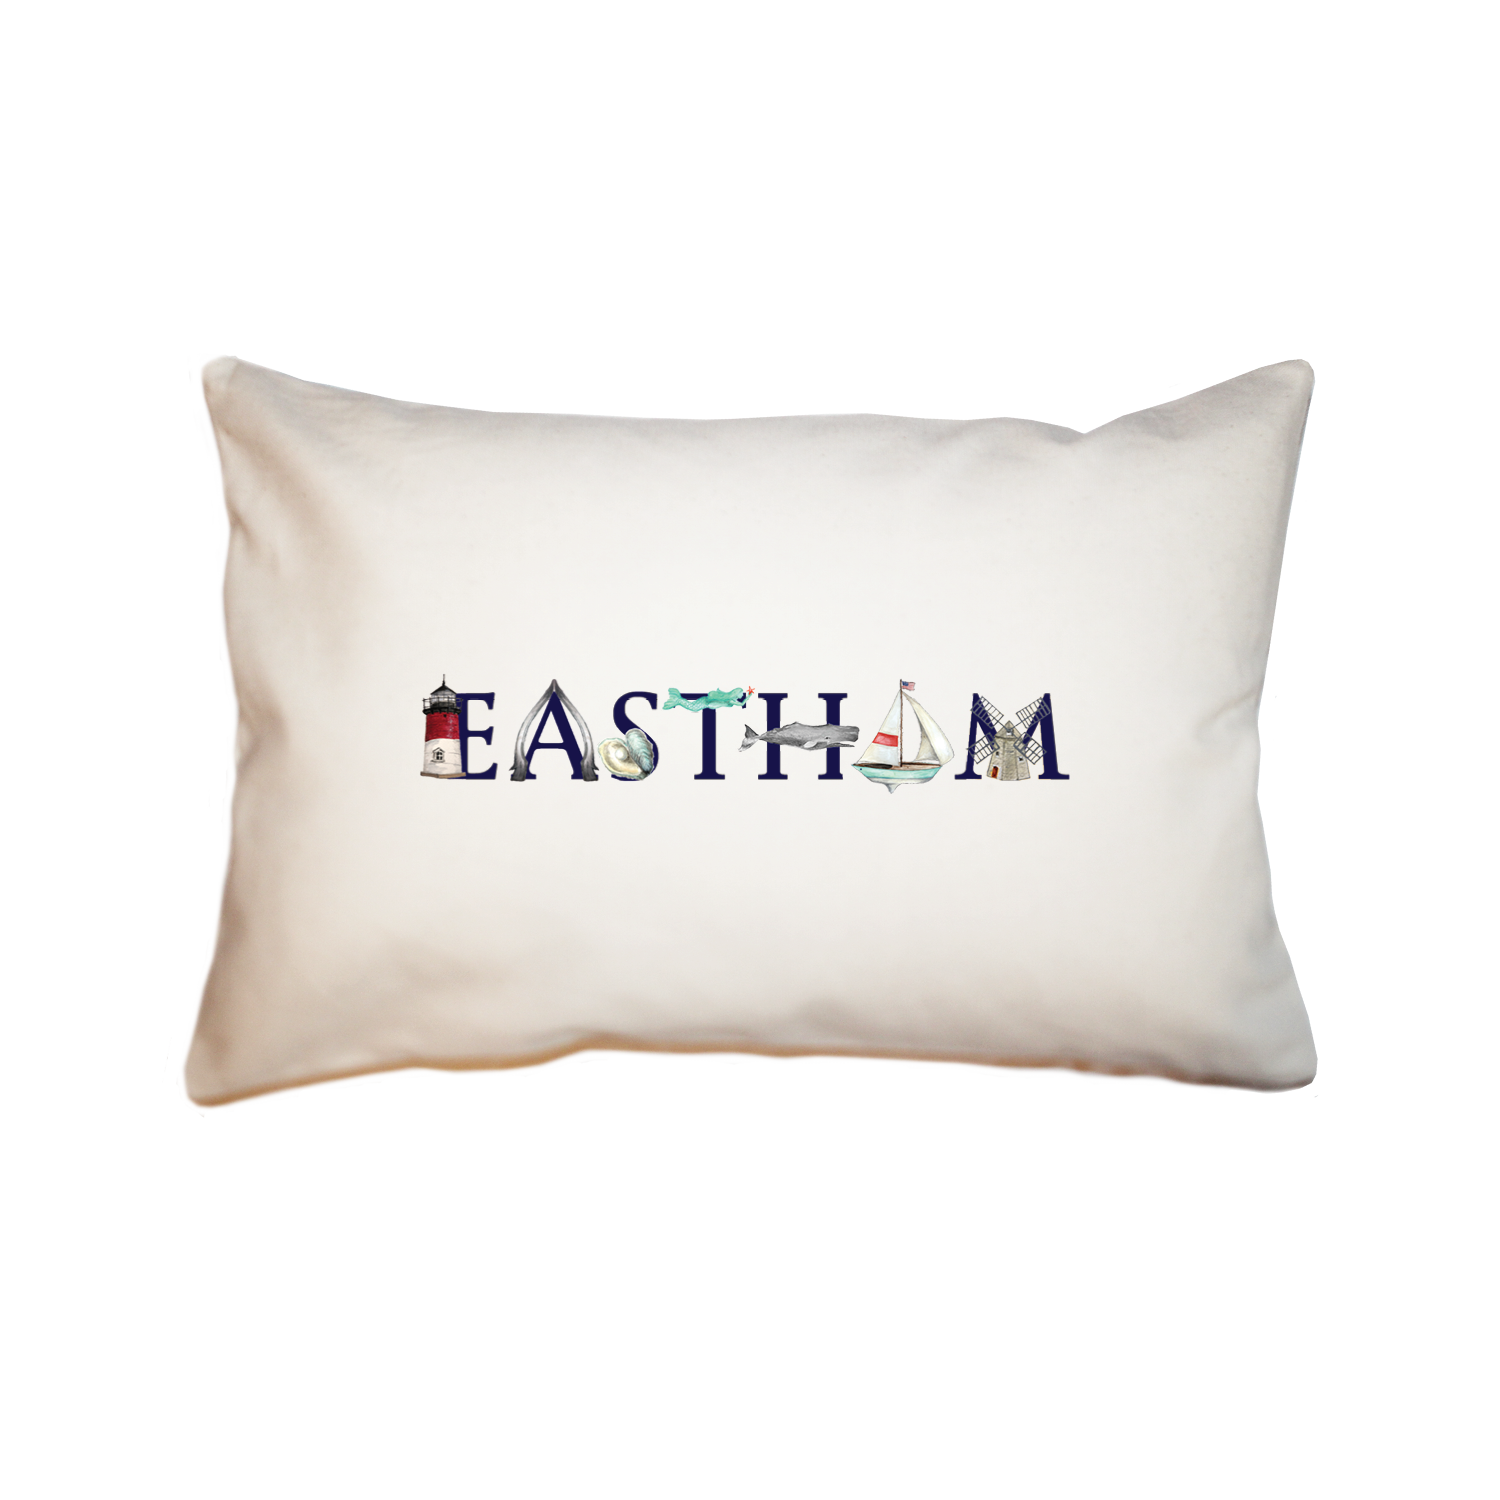 eastham large rectangle pillow